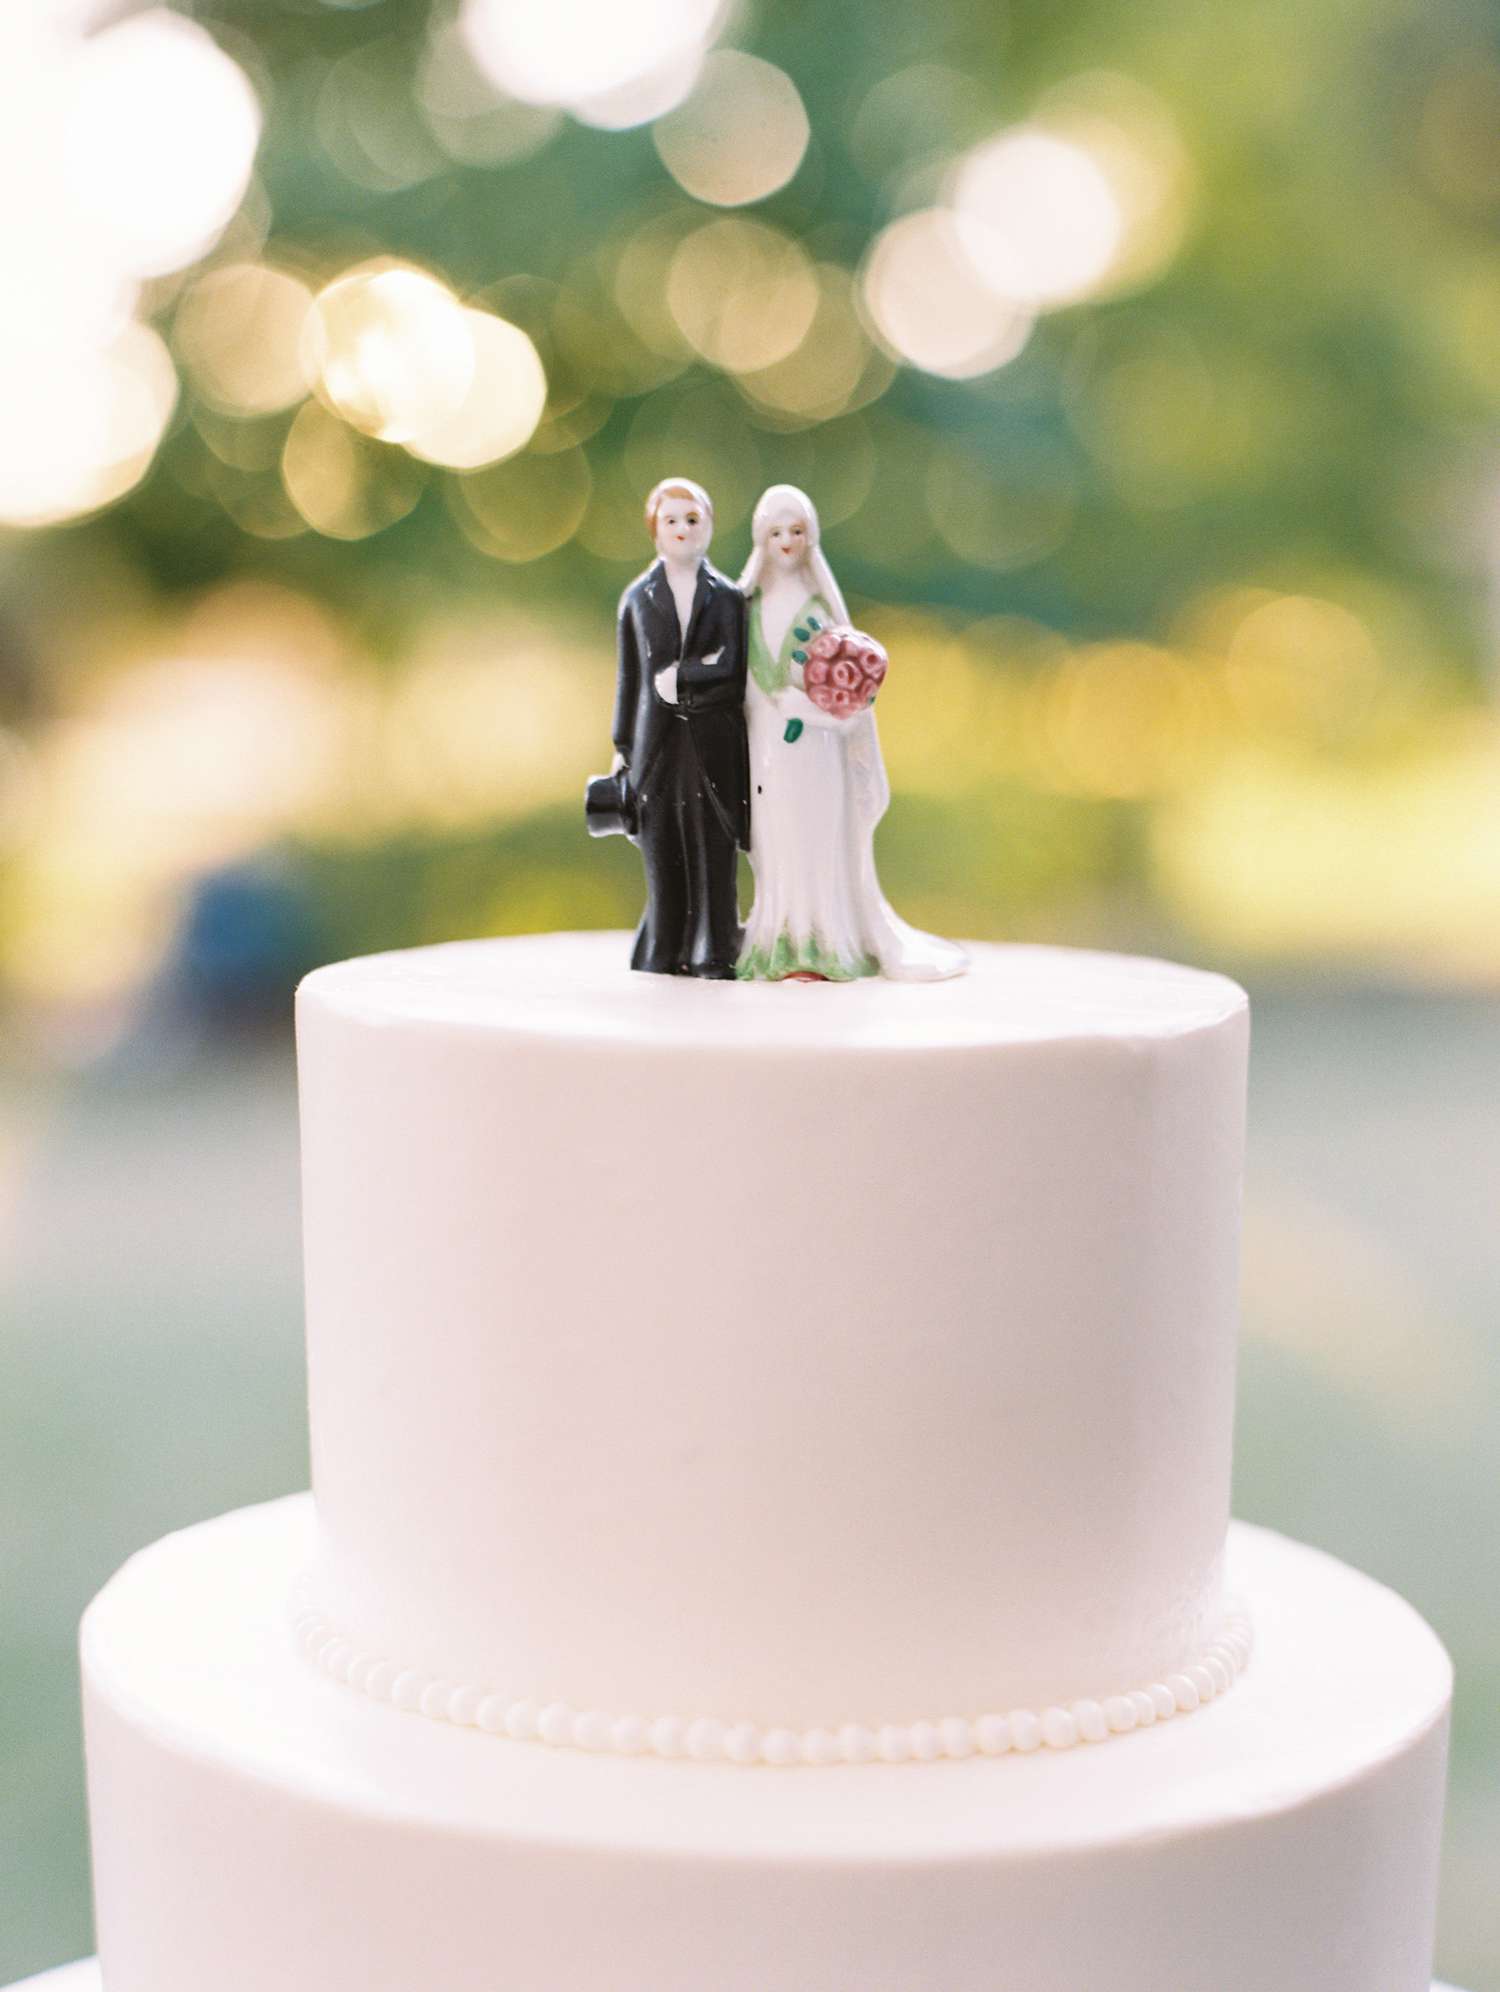 top tier of white wedding cake bride and groom topper